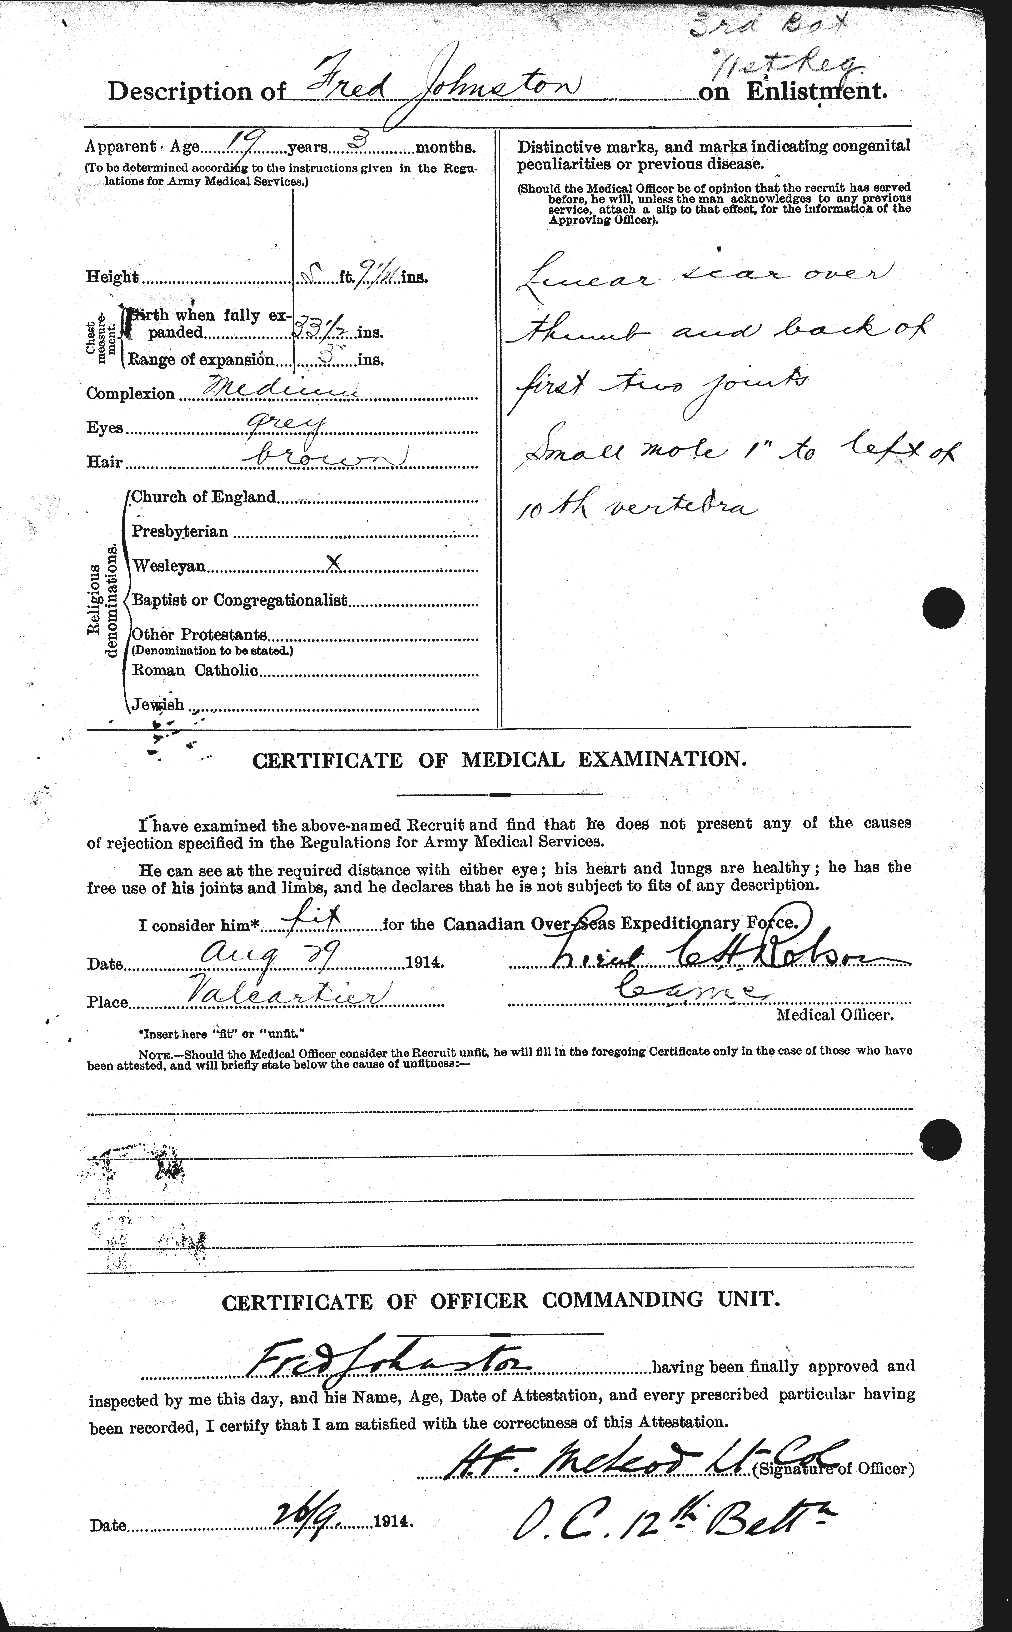 Personnel Records of the First World War - CEF 423290b